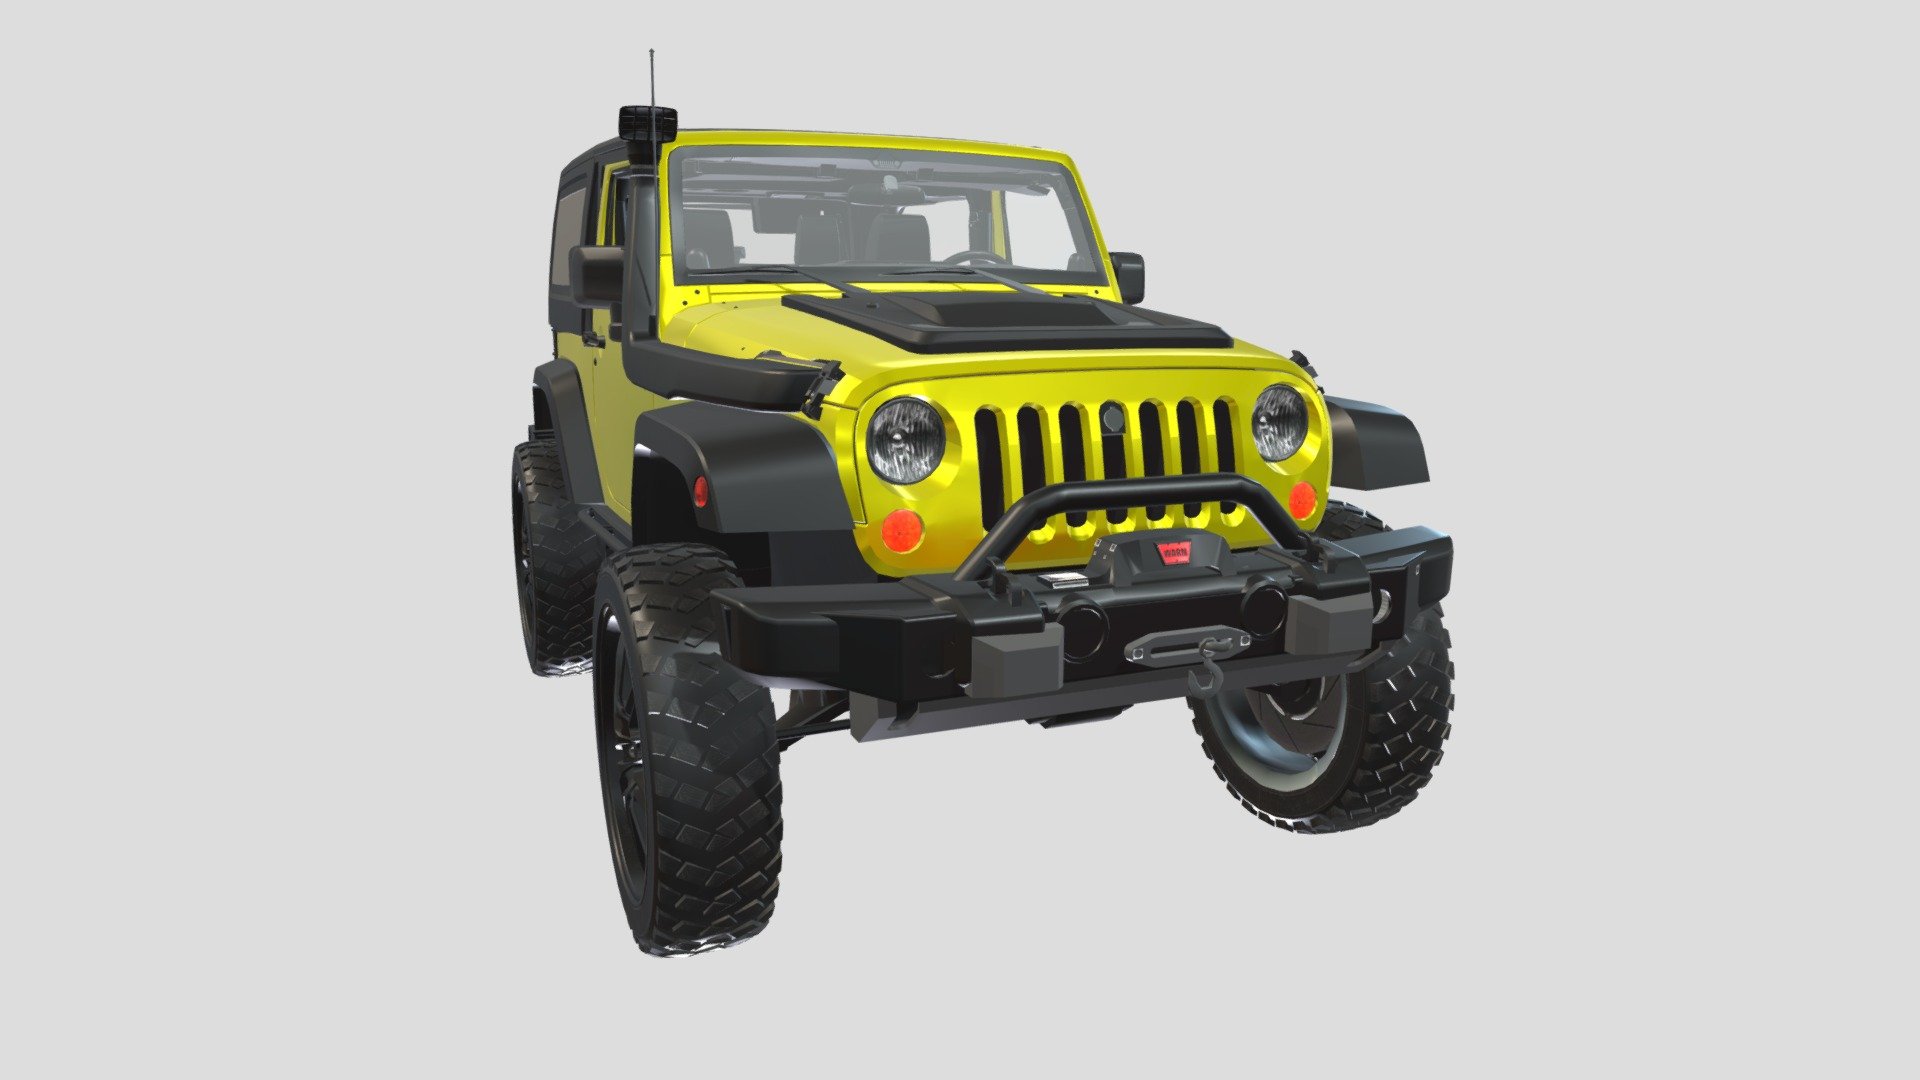 Car is ready to use in any game fully textured interior and exterior
You can use it any of your project.
Please rate the model and you can buy it free from Unity Asset Store 3d model